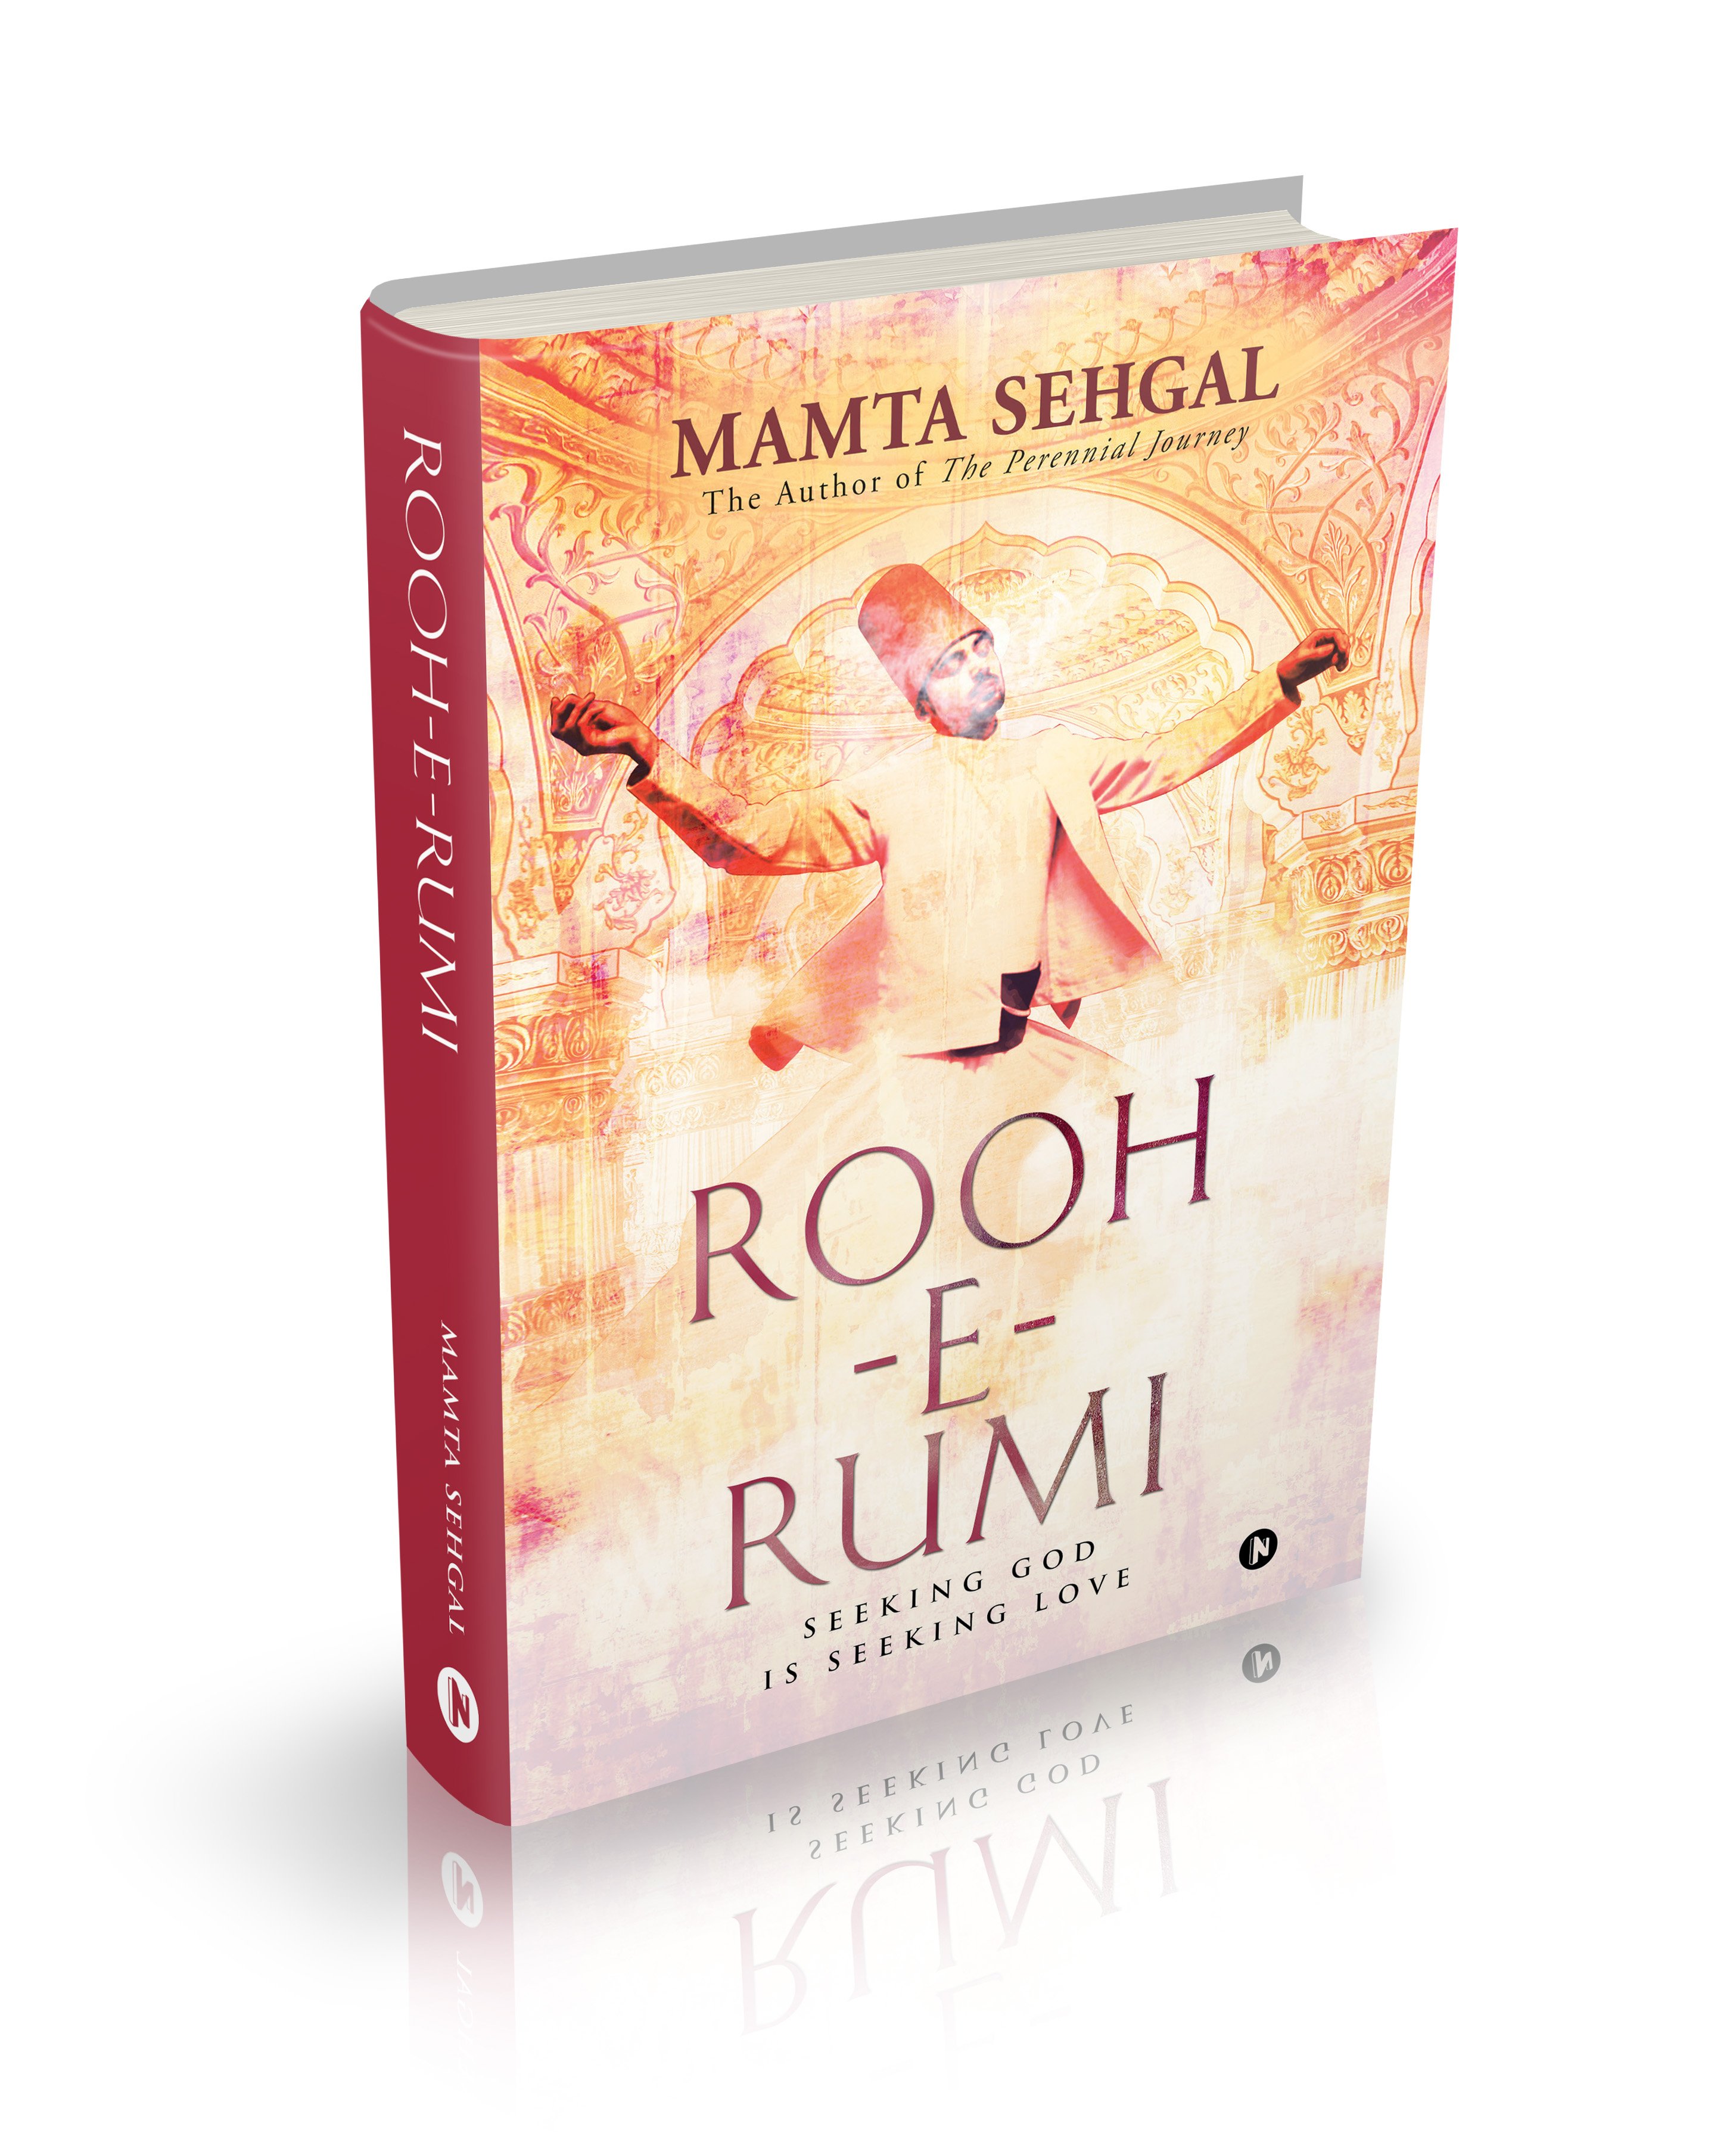 Rooh-e-Rumi, a collection of thought-provoking quotes of Rumi, interpreted by way of the author's spiritual realizations, through two themes: 